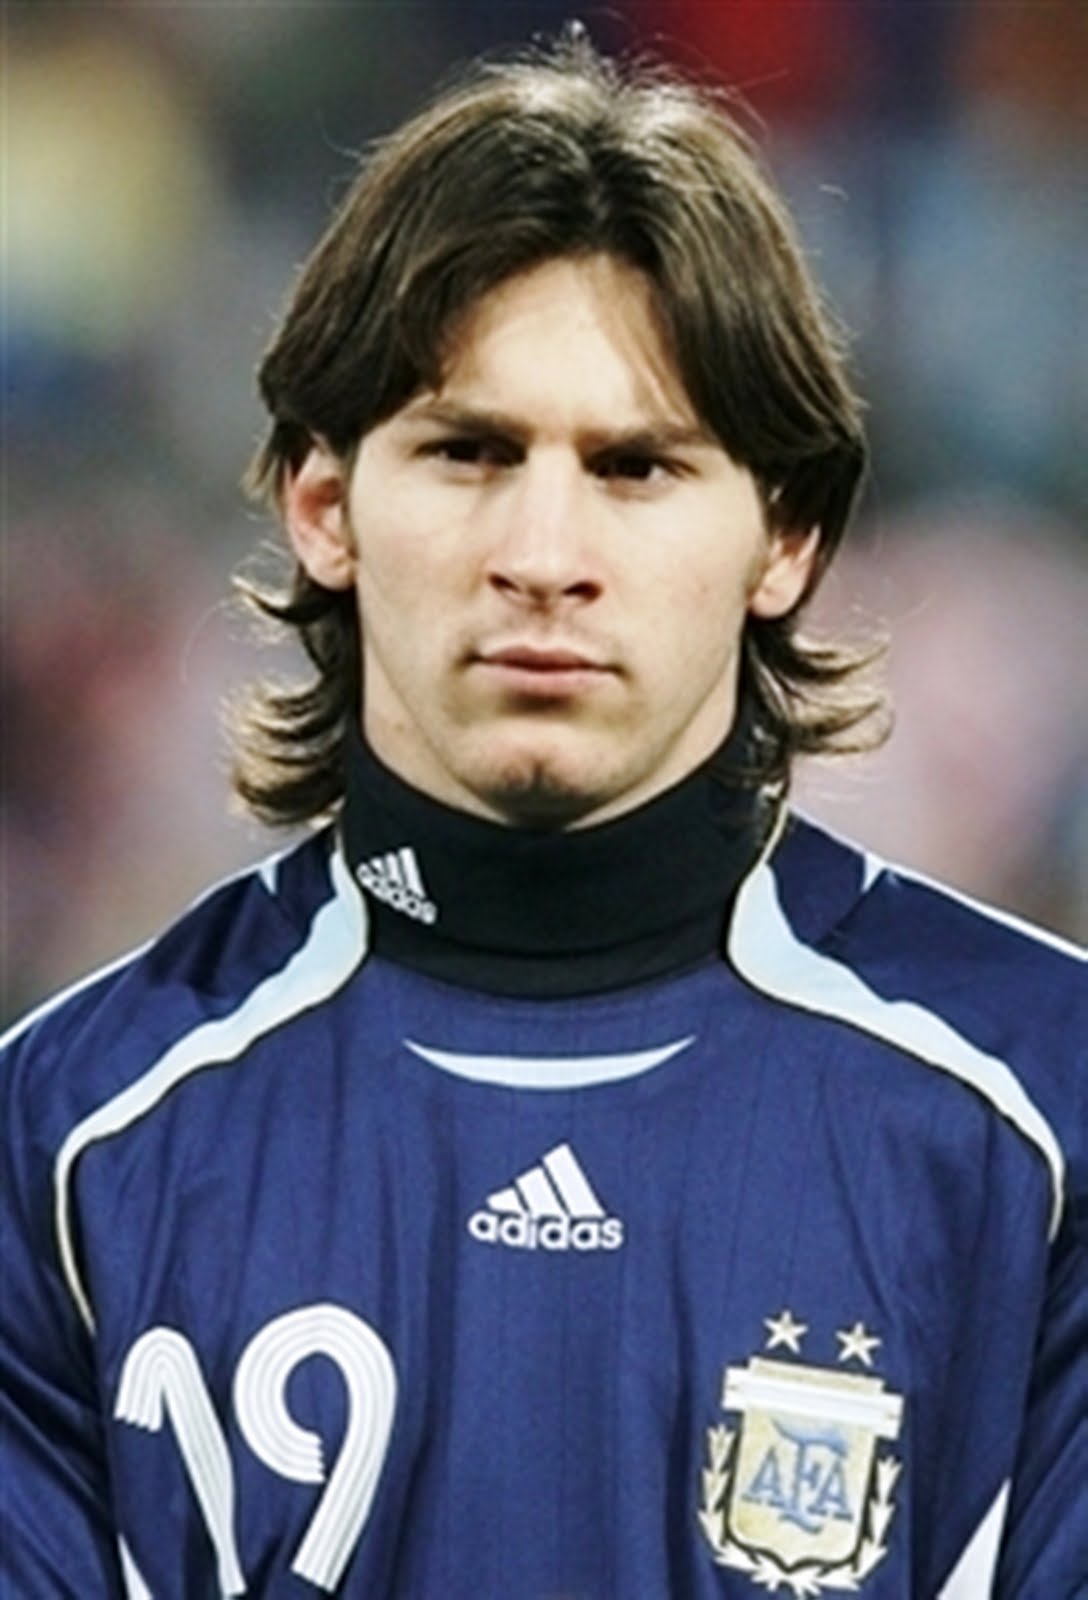 Hairstyle Leo Messi